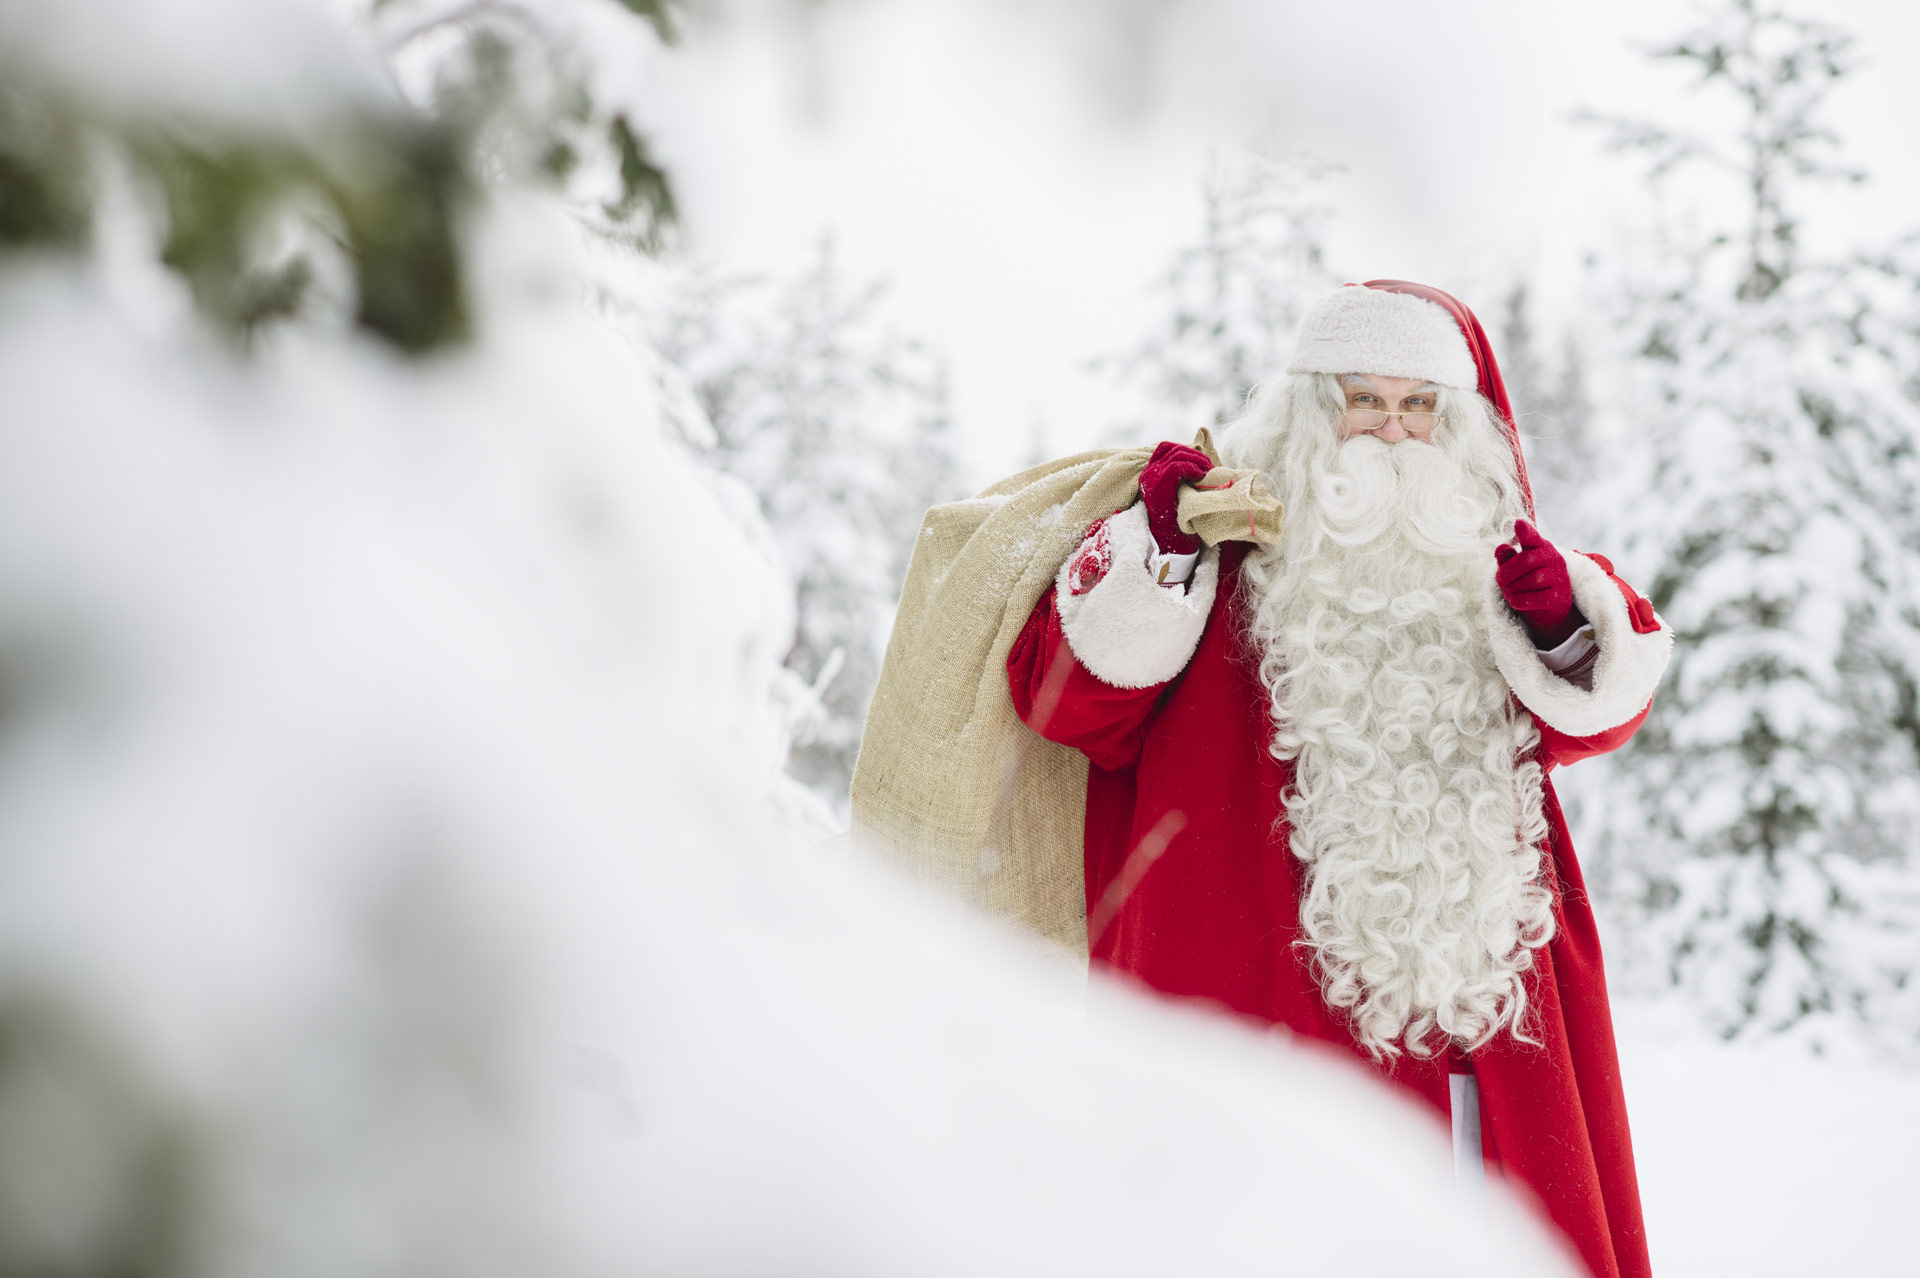 how-does-santa-claus-look-like-offers-online-save-62-jlcatj-gob-mx